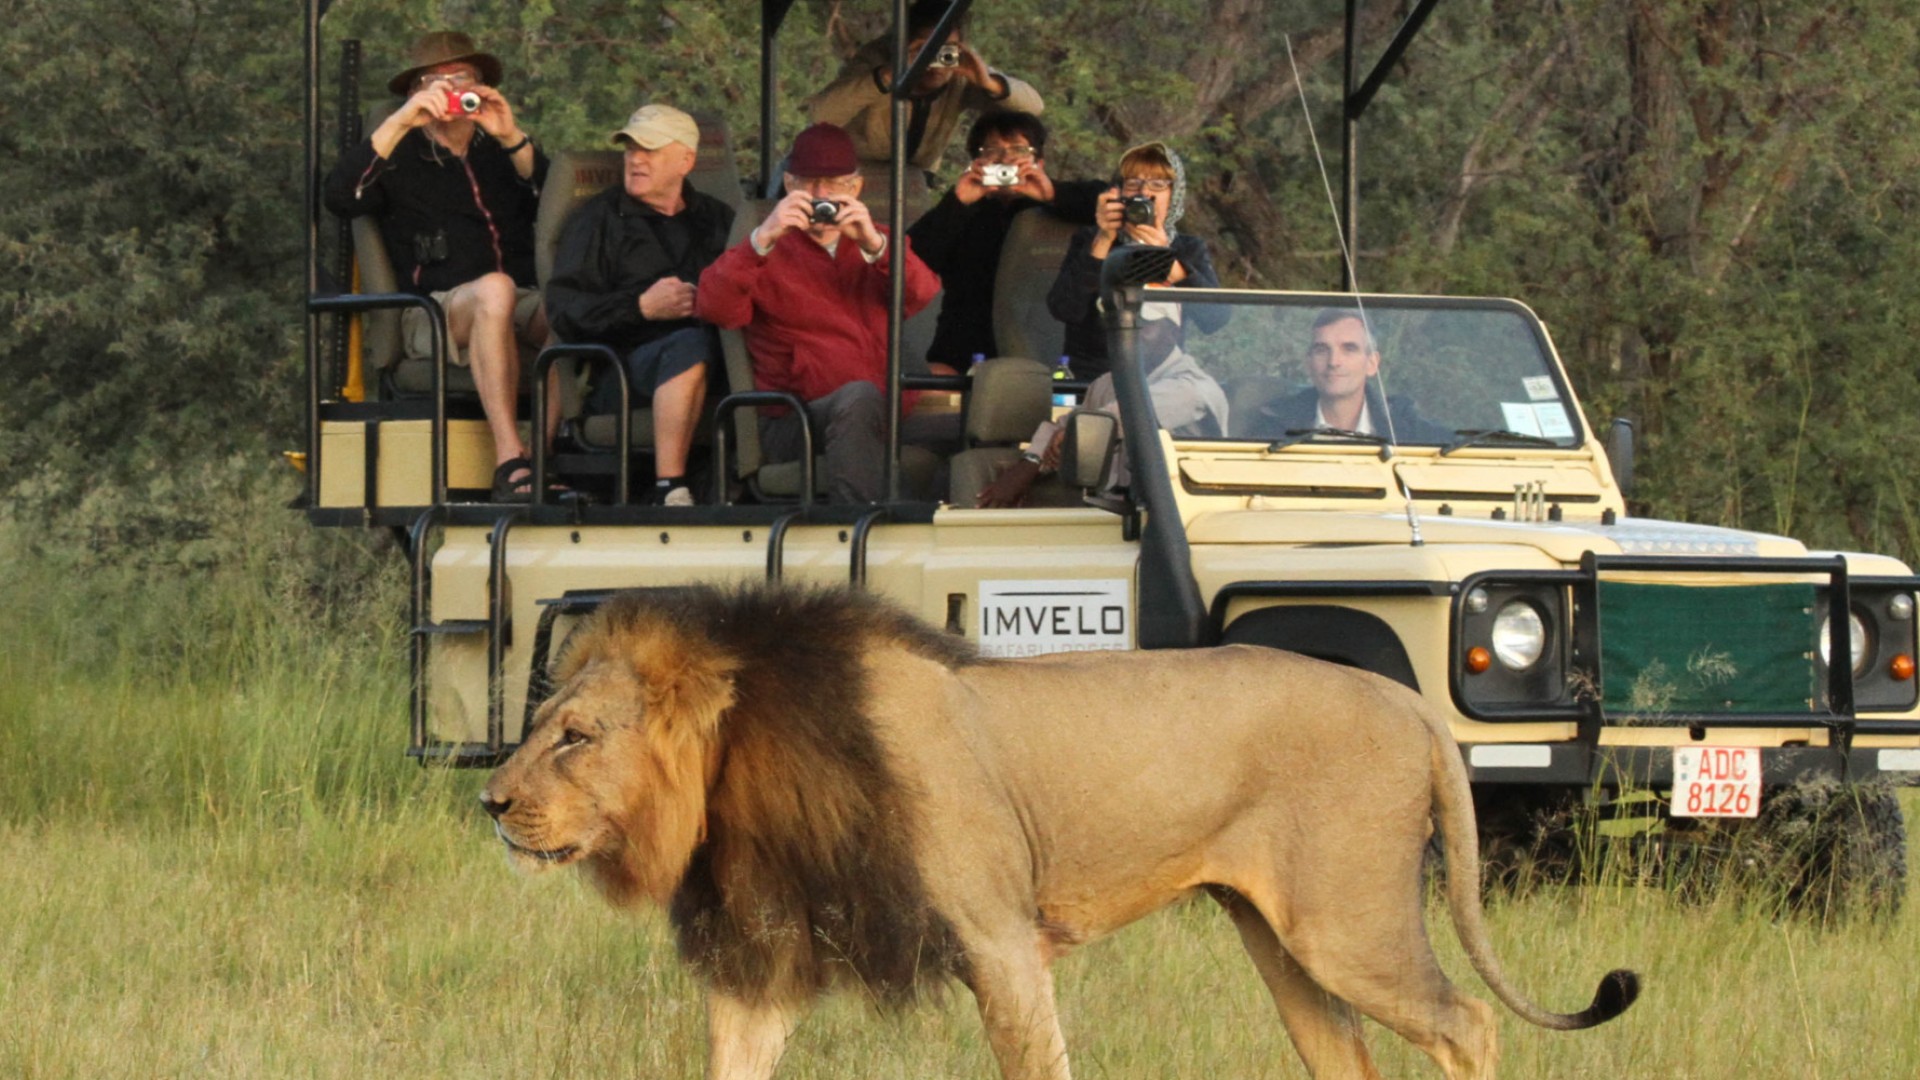 Group of tourists in a safari car watching a lion